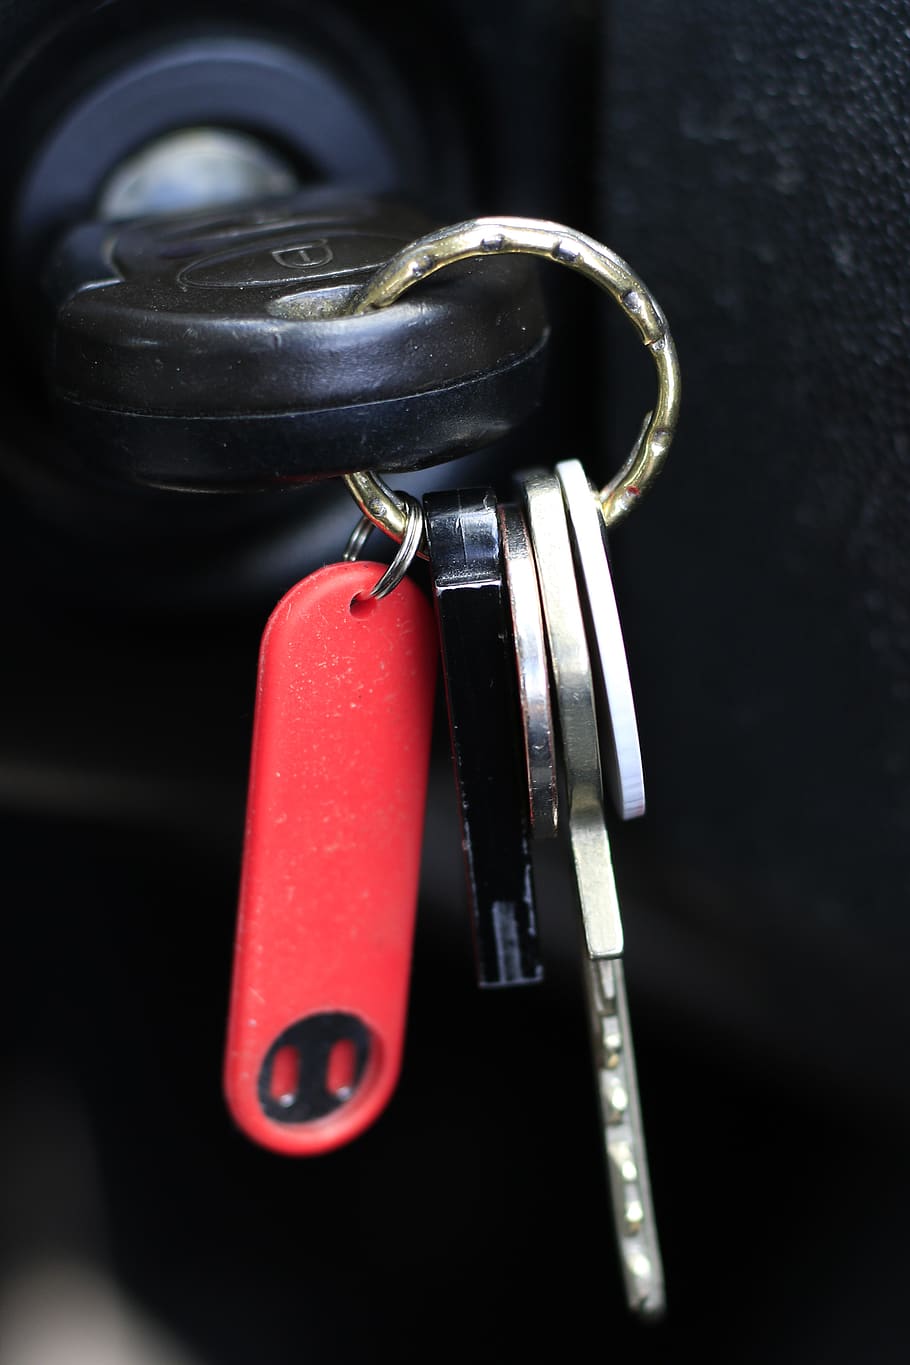 key, metal, keys, car, safety, security, red, close-up, protection